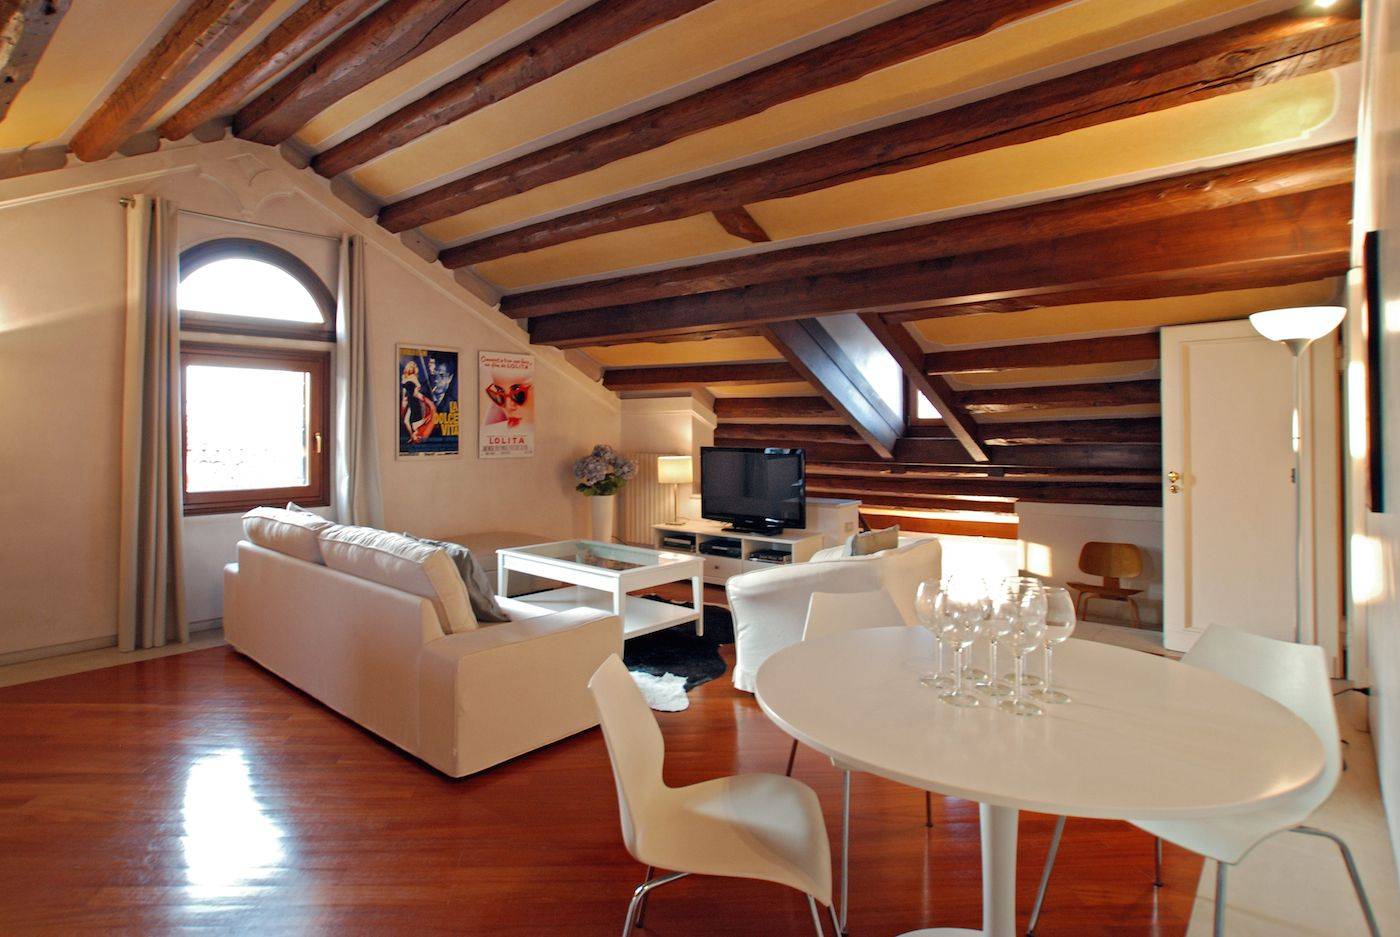 wercoming and spacious, the attic living room can be used as the 4th bedroom